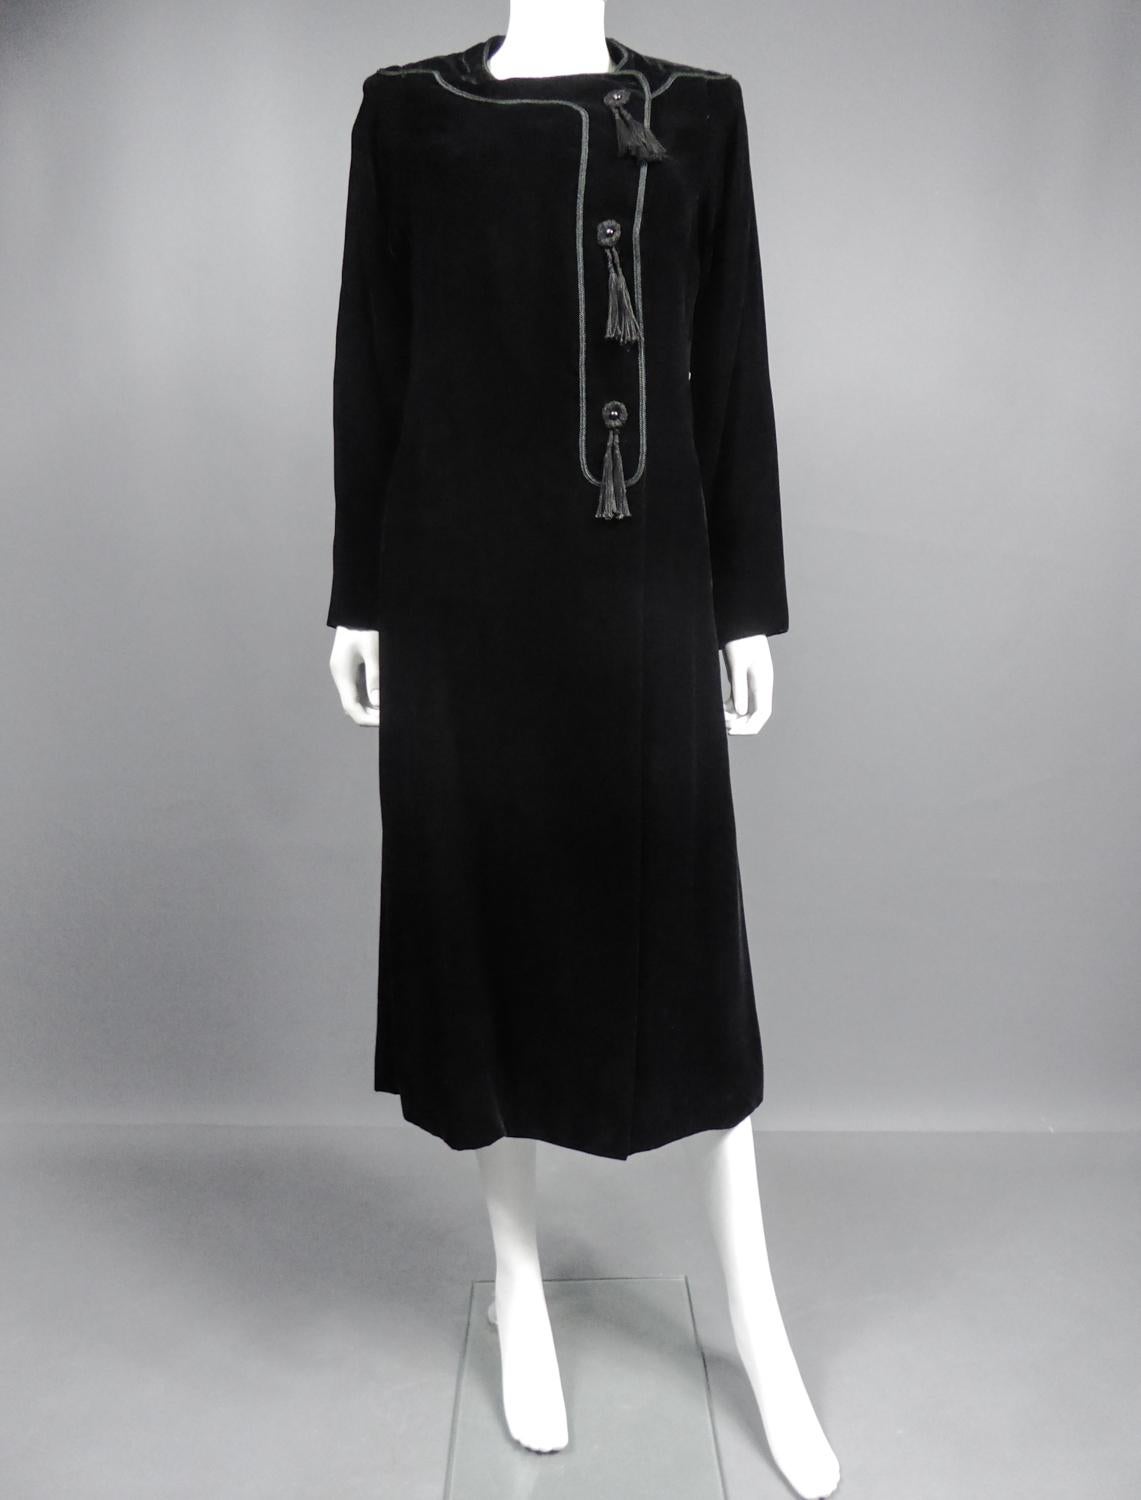 Women's A french Couture Emanuel Ungaro Little Black Dress Number 4383-10-76 Circa 1976 For Sale